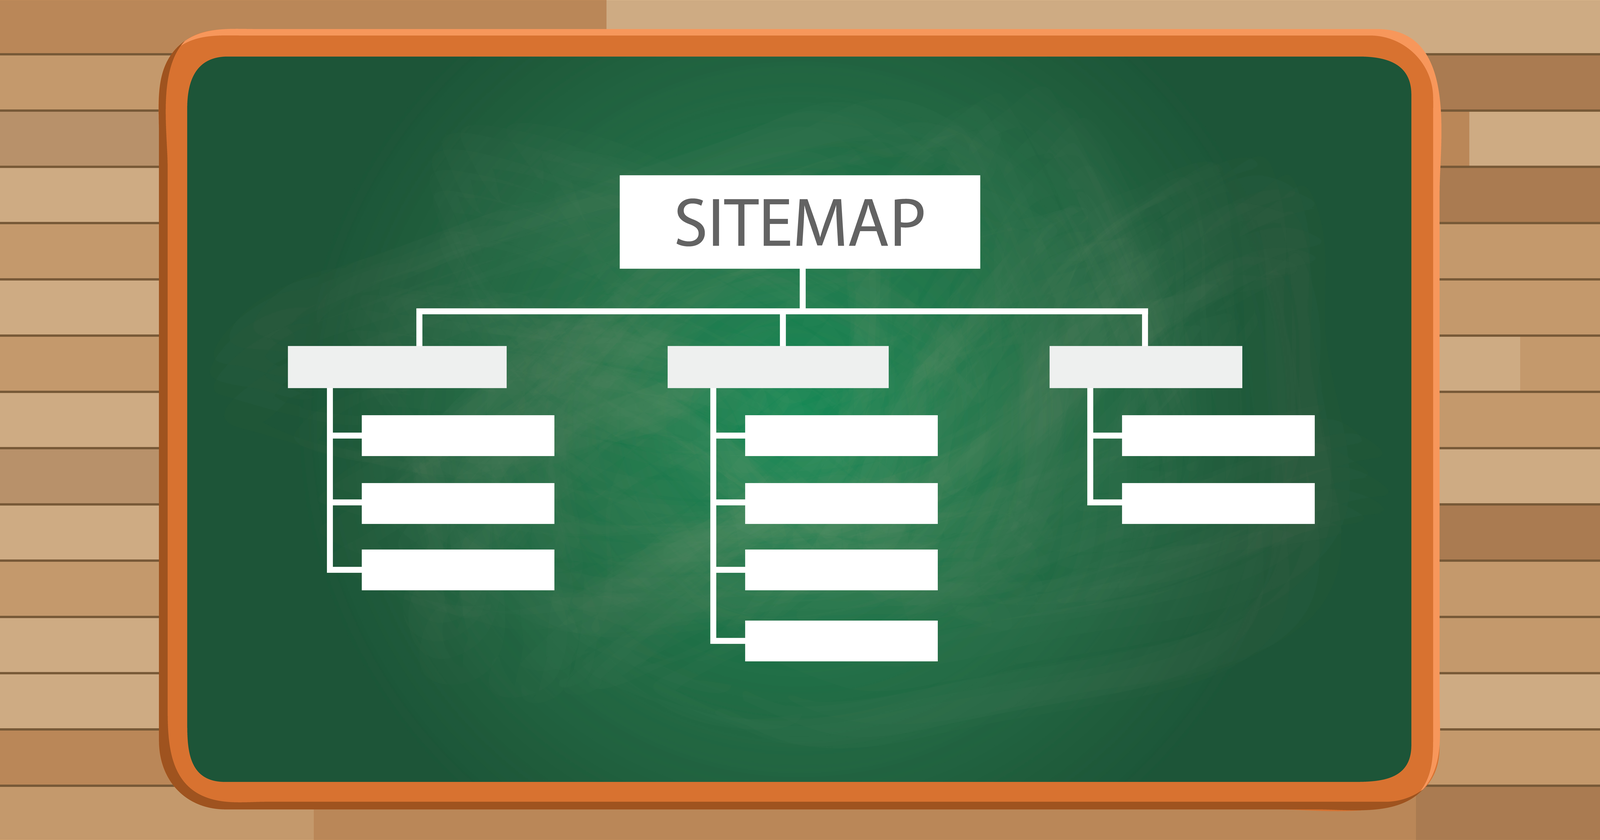 sitemaps-featured-image-5fd1c052b40ef.png